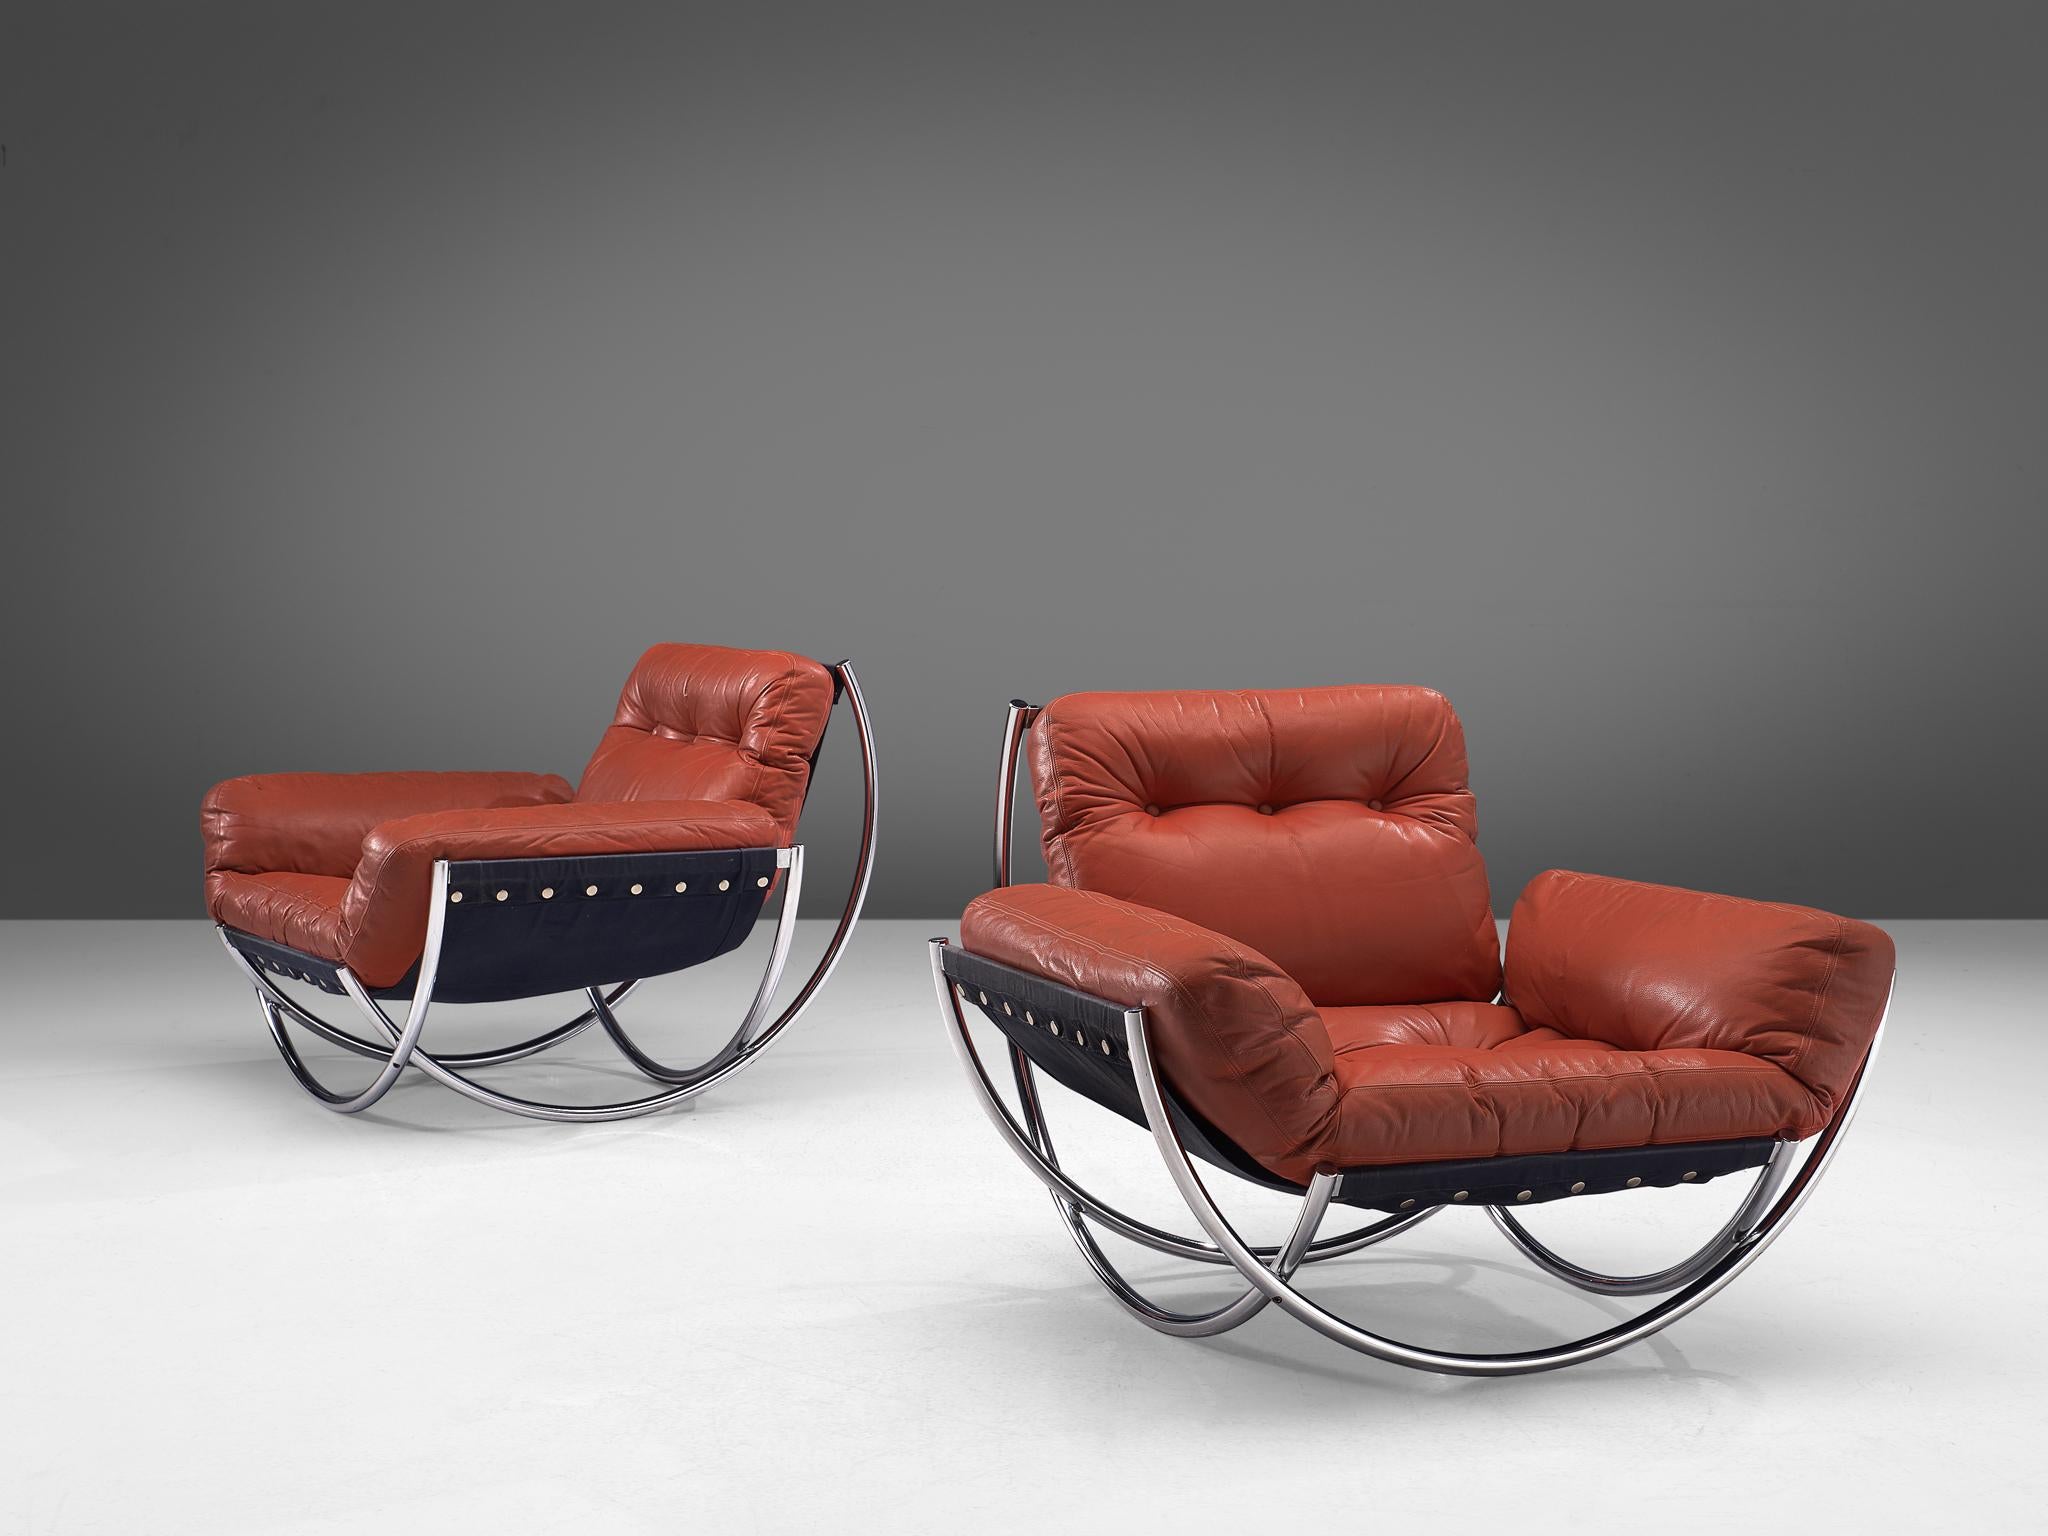 Lennart Bender for Wibro AB, 'Wilo' lounge chair, Sweden, 1967

Modern lounge chair designed by the Swede Lennart Bender. The design features a quintessential tubular frame, consisting of four semicircles. Dark canvas is spanned in between that